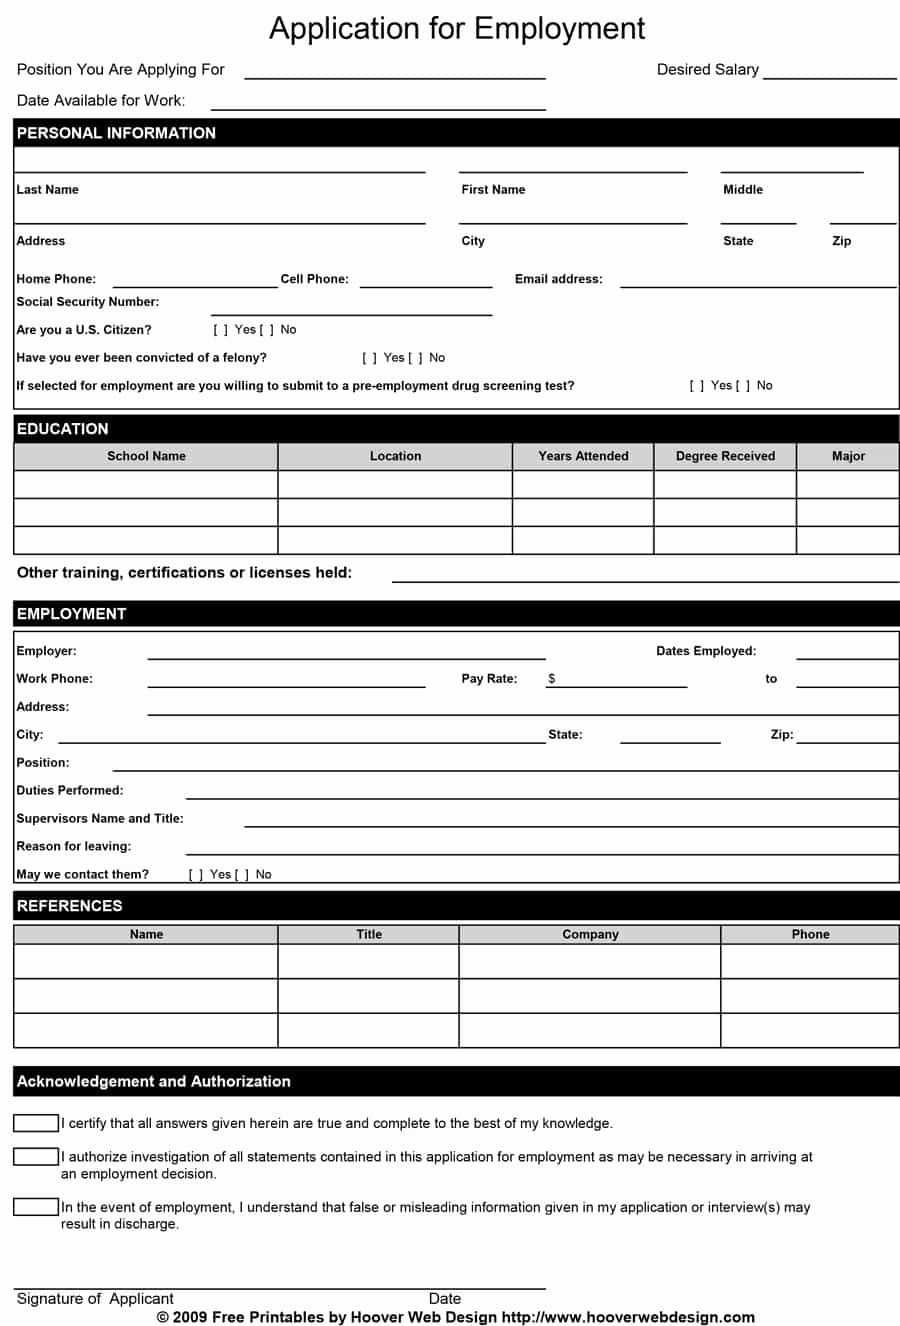 General Application for Employment Printable Fresh 50 Free Employment Job Application form Templates